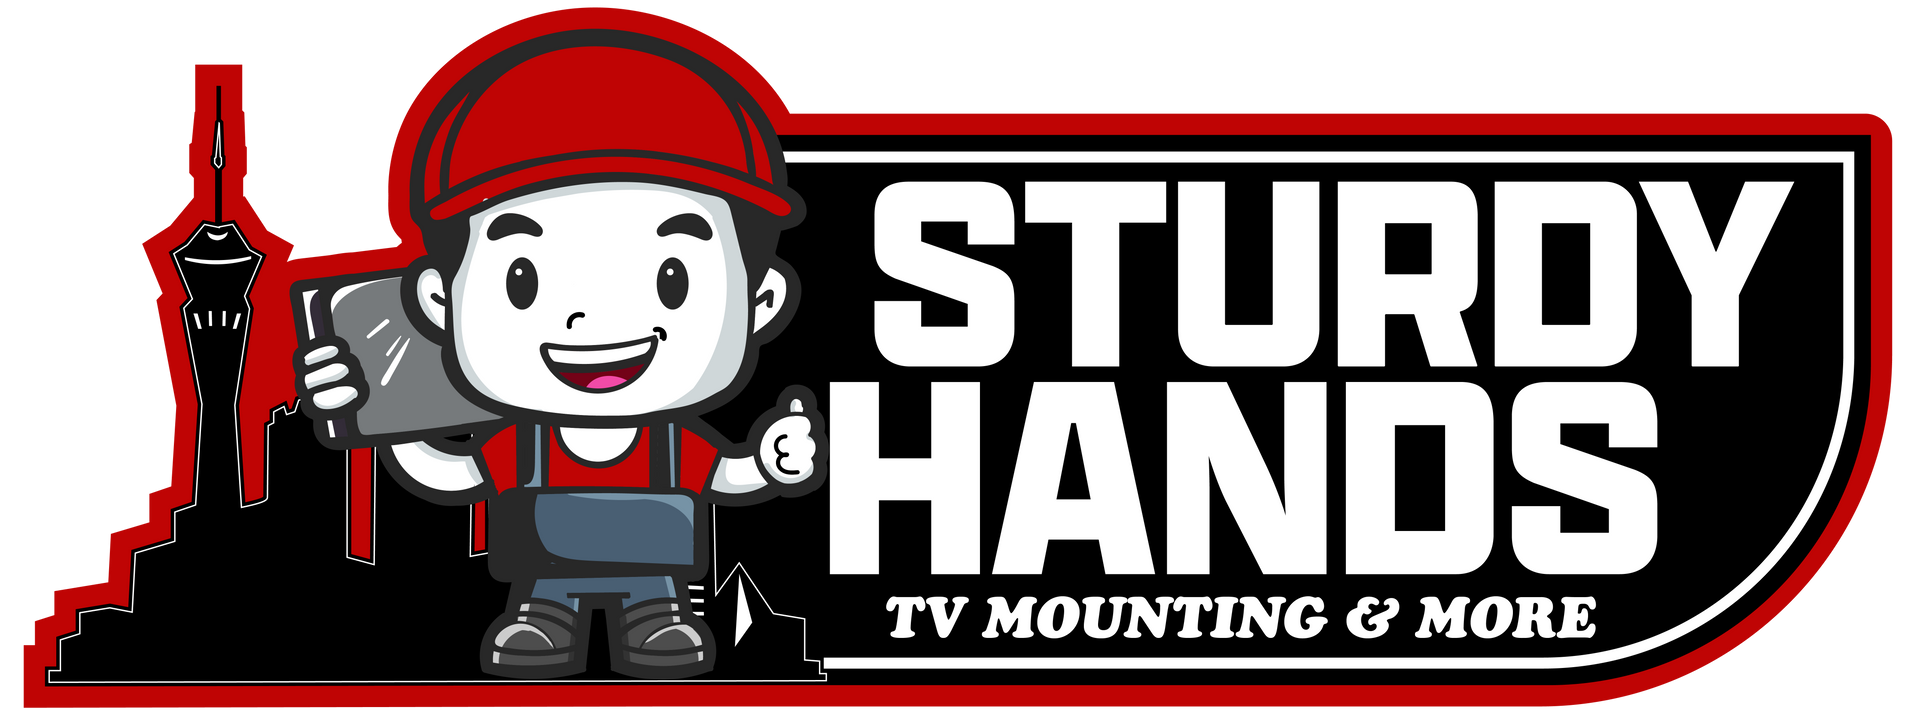 Sturdy Hands Tv Mounting & More